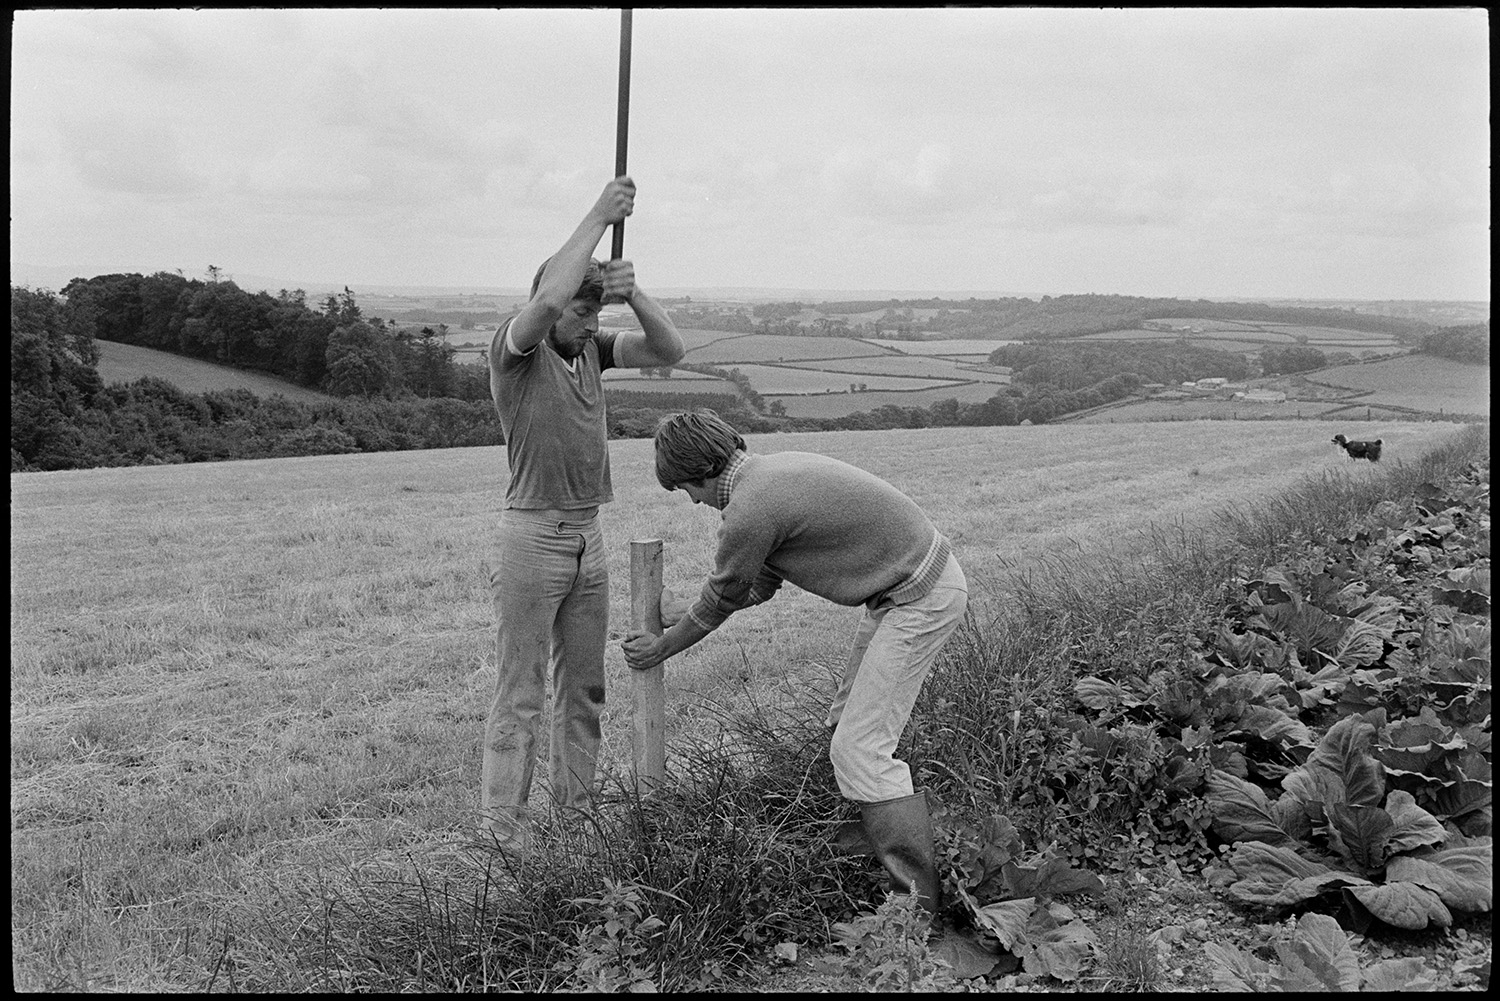 Two farmers hammering fencing post. 
[Two men, one of which is Simon Berry, hammering in a fence post by a field at South Harepath, Beaford. A dog is visible in the field and a landscape of fields, trees and hedges can be seen in the background.]